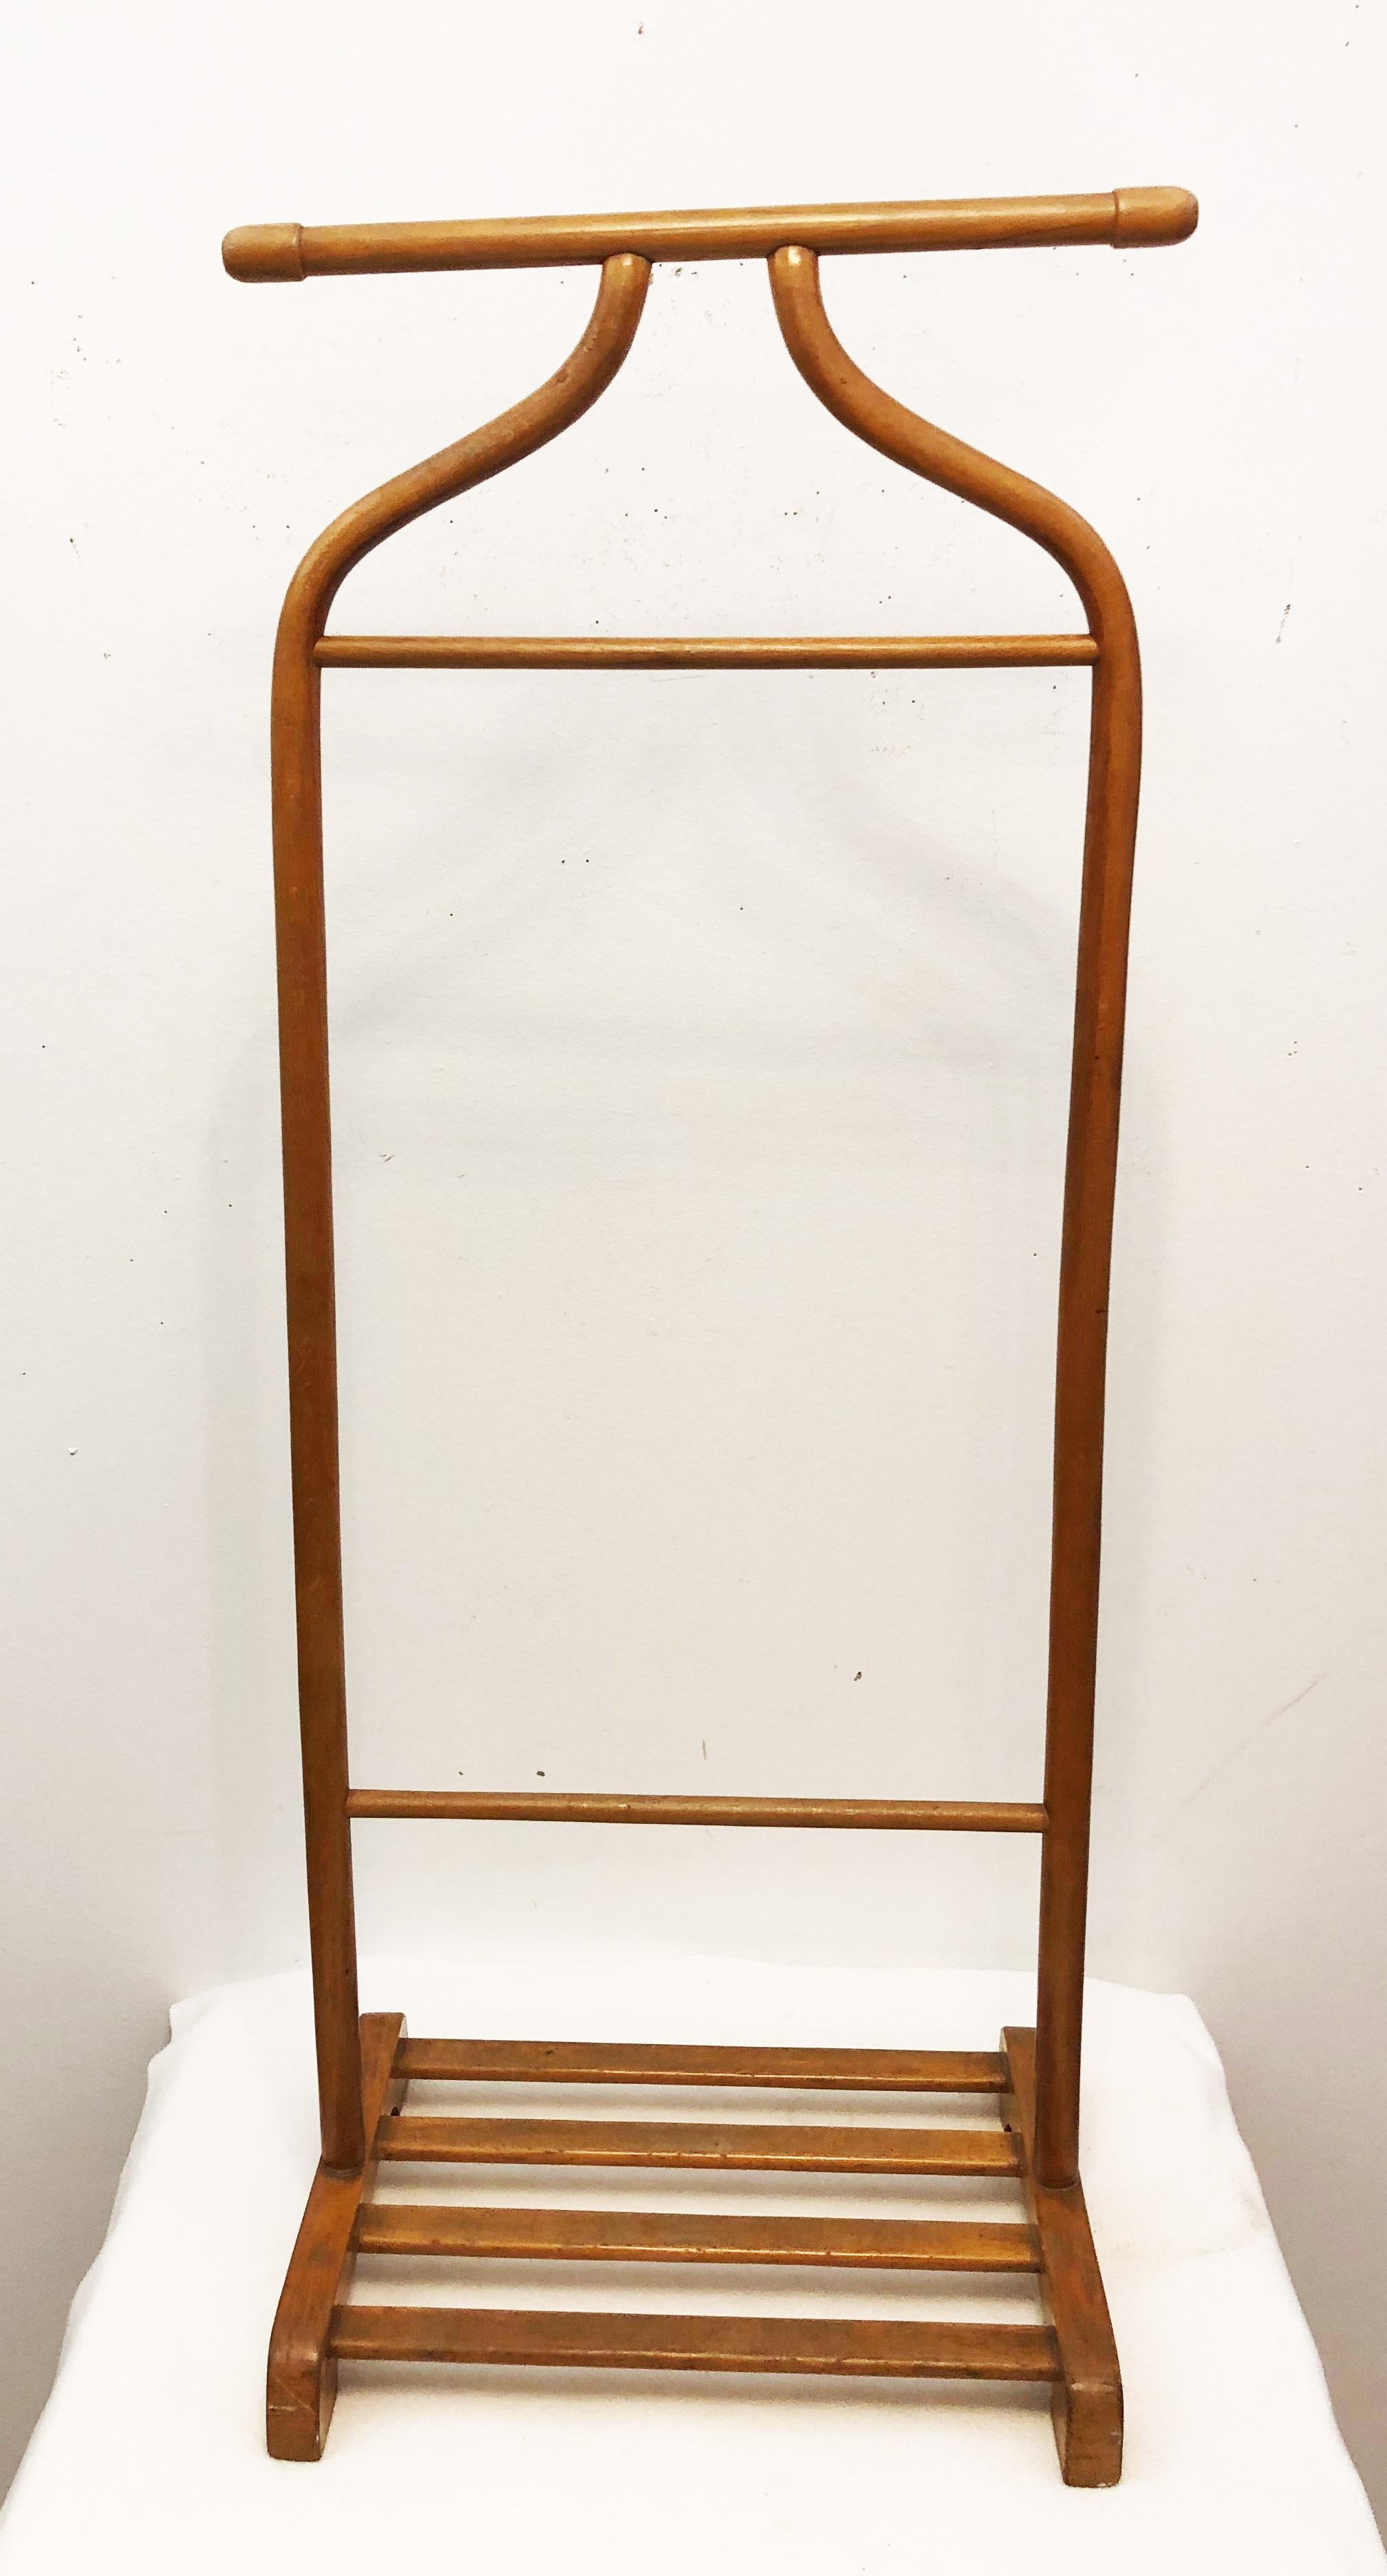 Beech Thonet Valet or Dressing Stand, Vienna Secession